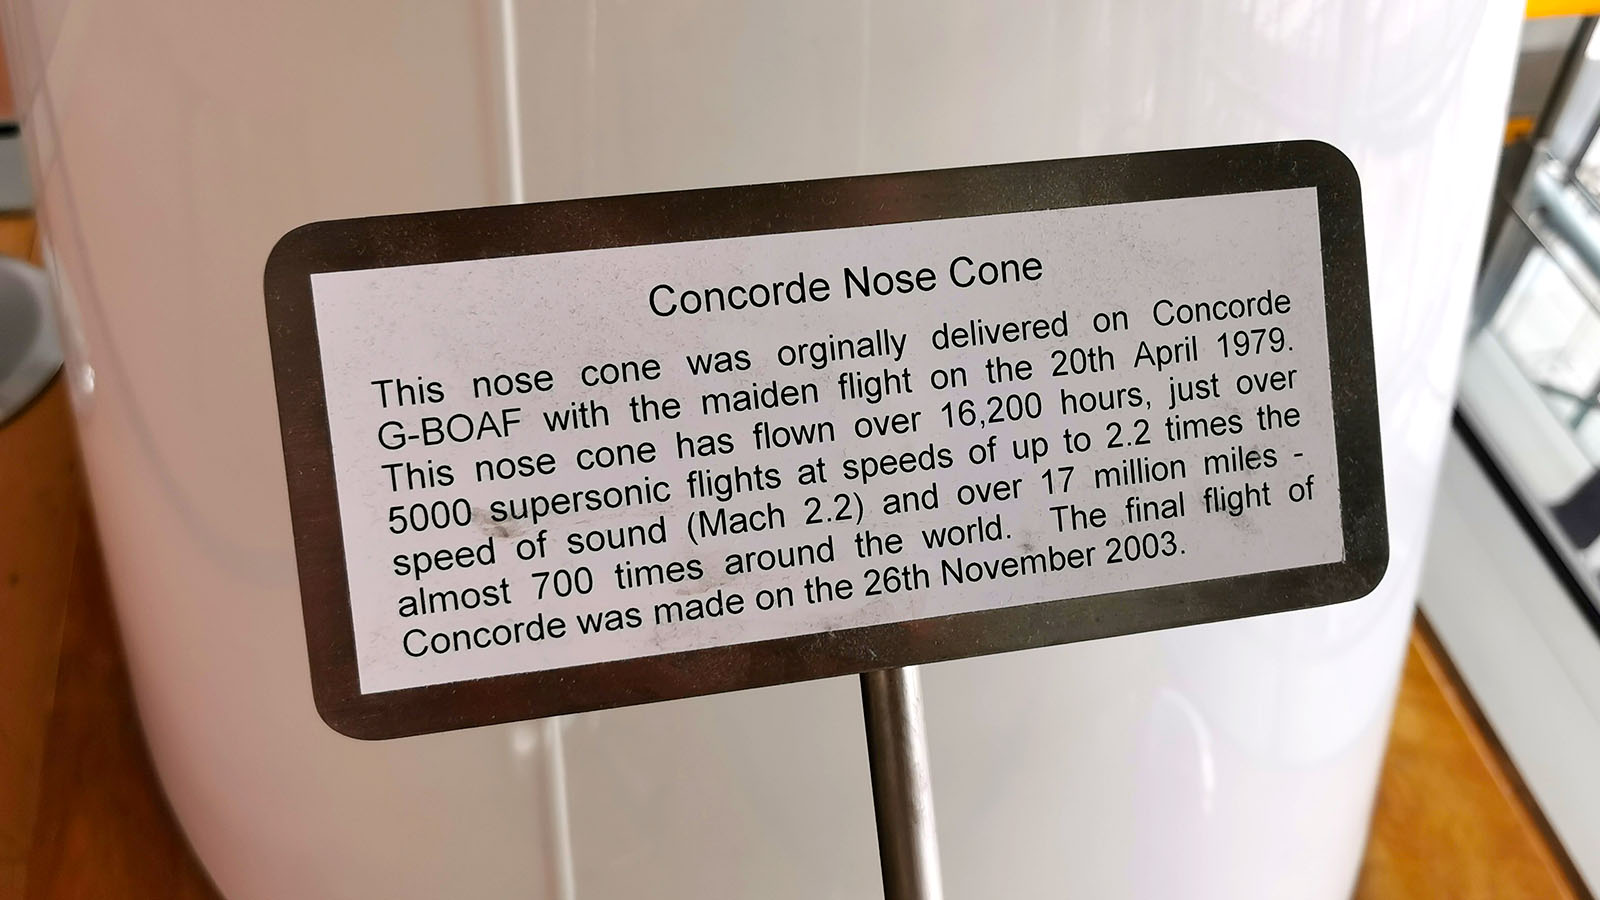 Sign about the Concorde in the BA Concorde Room at London Heathrow